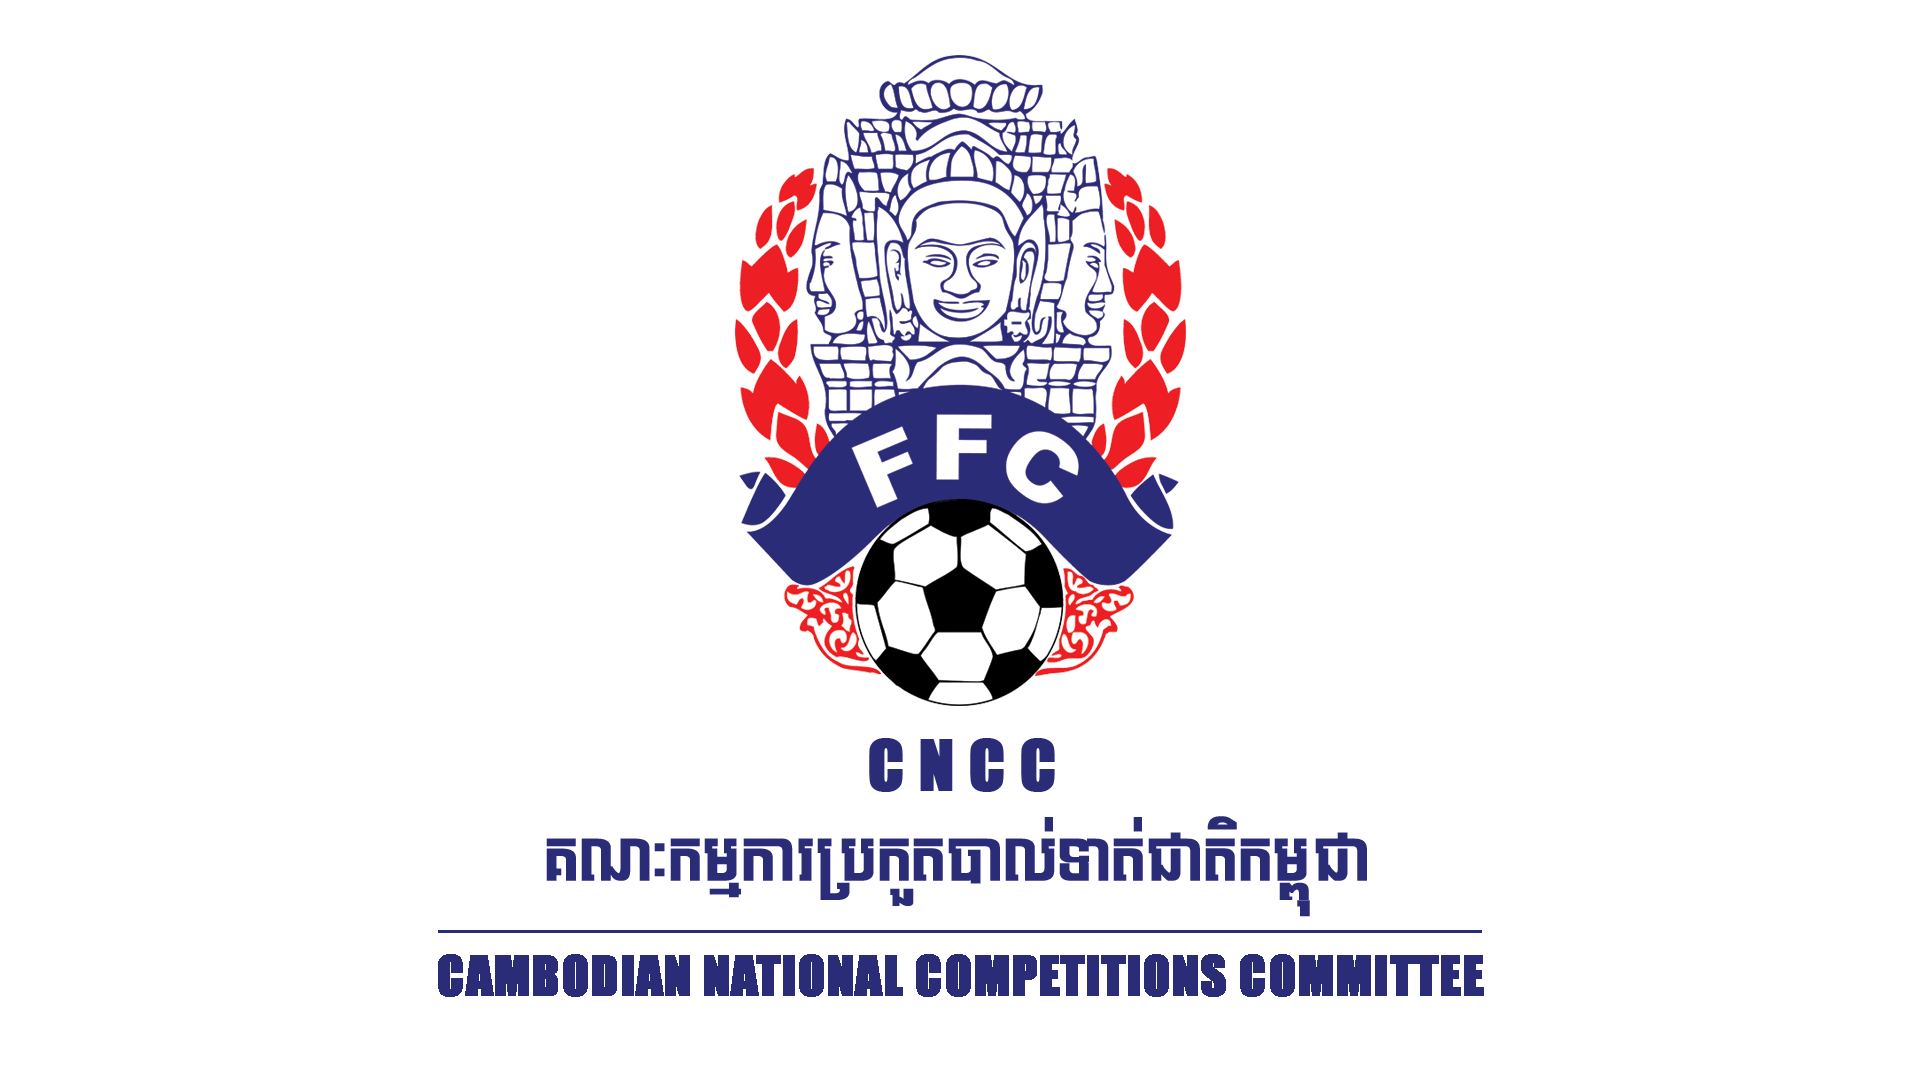 We're working for Cambodia Football 
⚽️🇰🇭🇰🇭🇰🇭
#CNCC